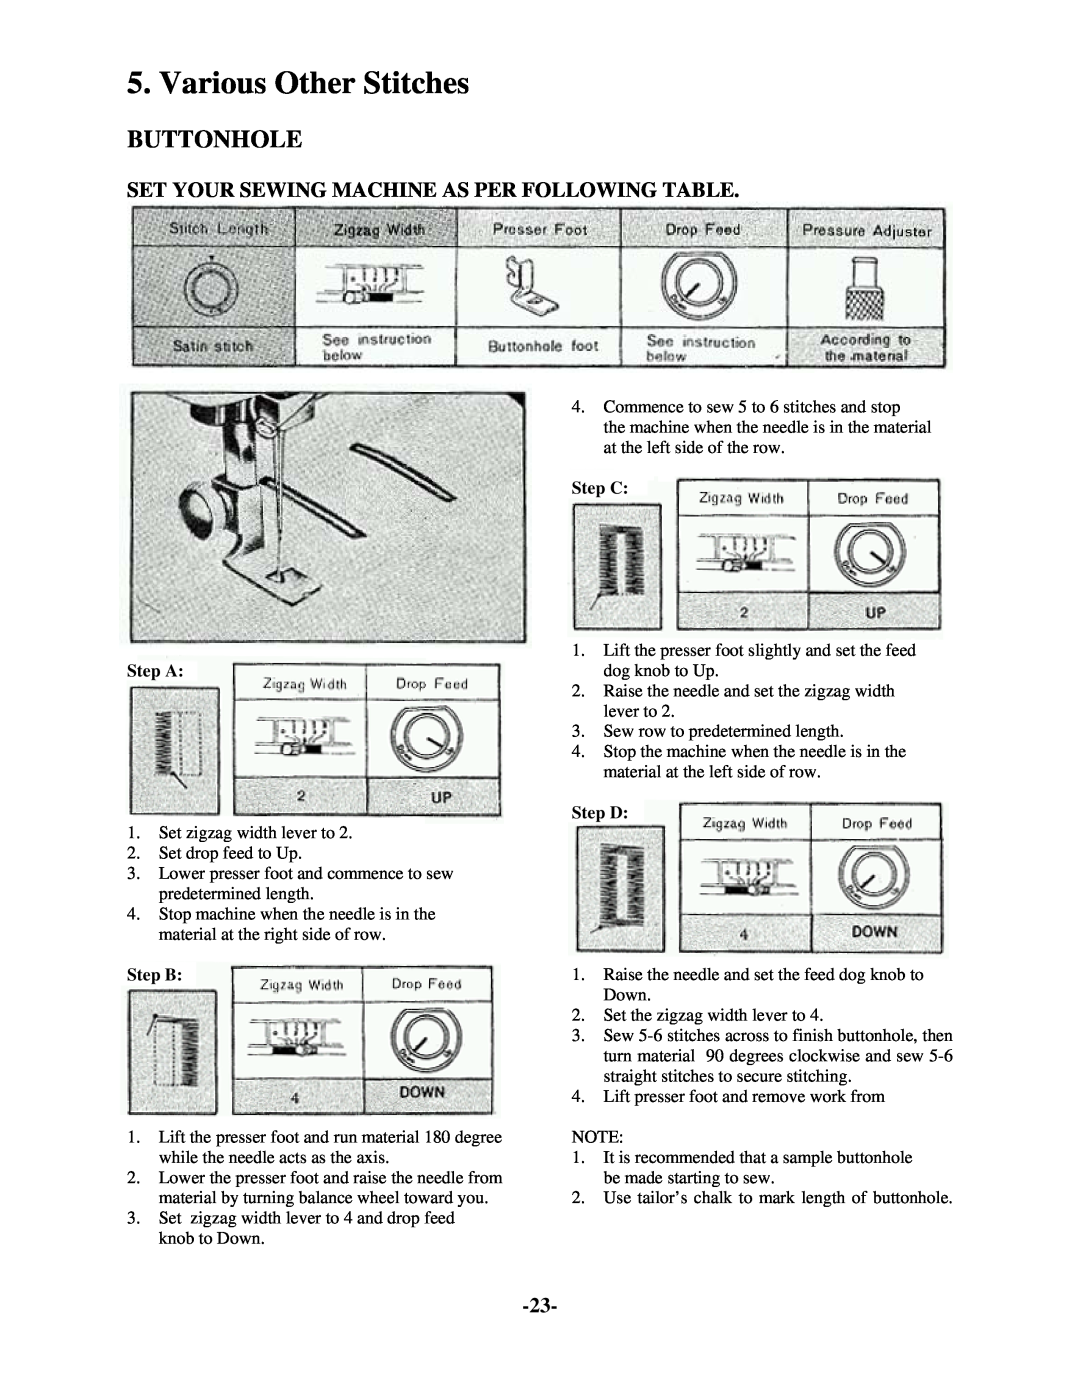 Brother 681B-UG Various Other Stitches, Set Your Sewing Machine As Per Following Table, Step A, Step B, Step C, Step D 